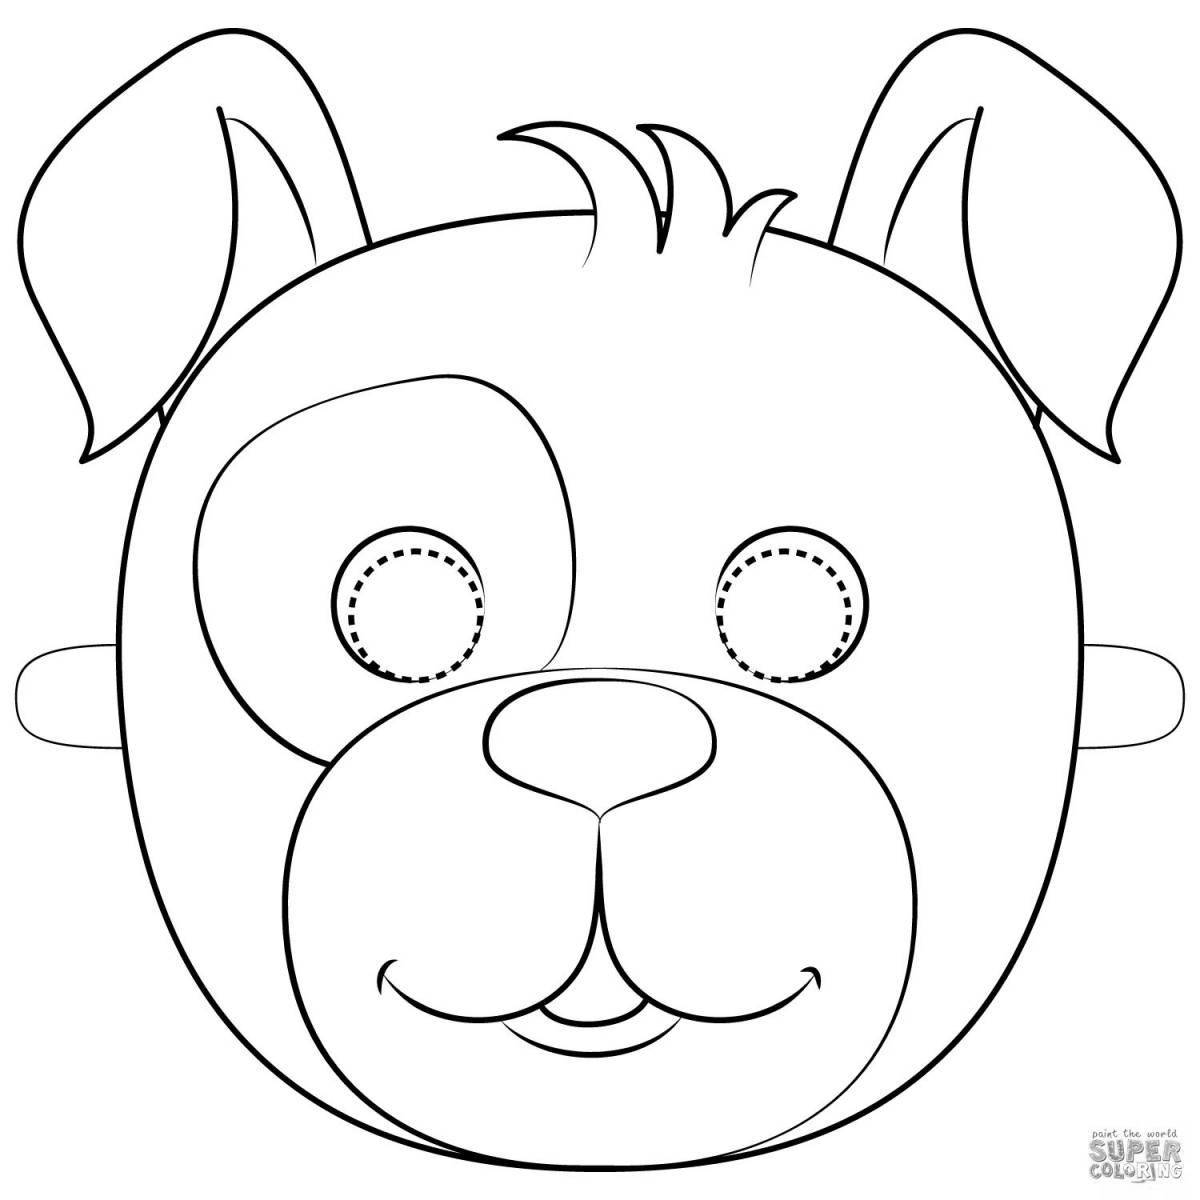 A funny animal mask coloring book